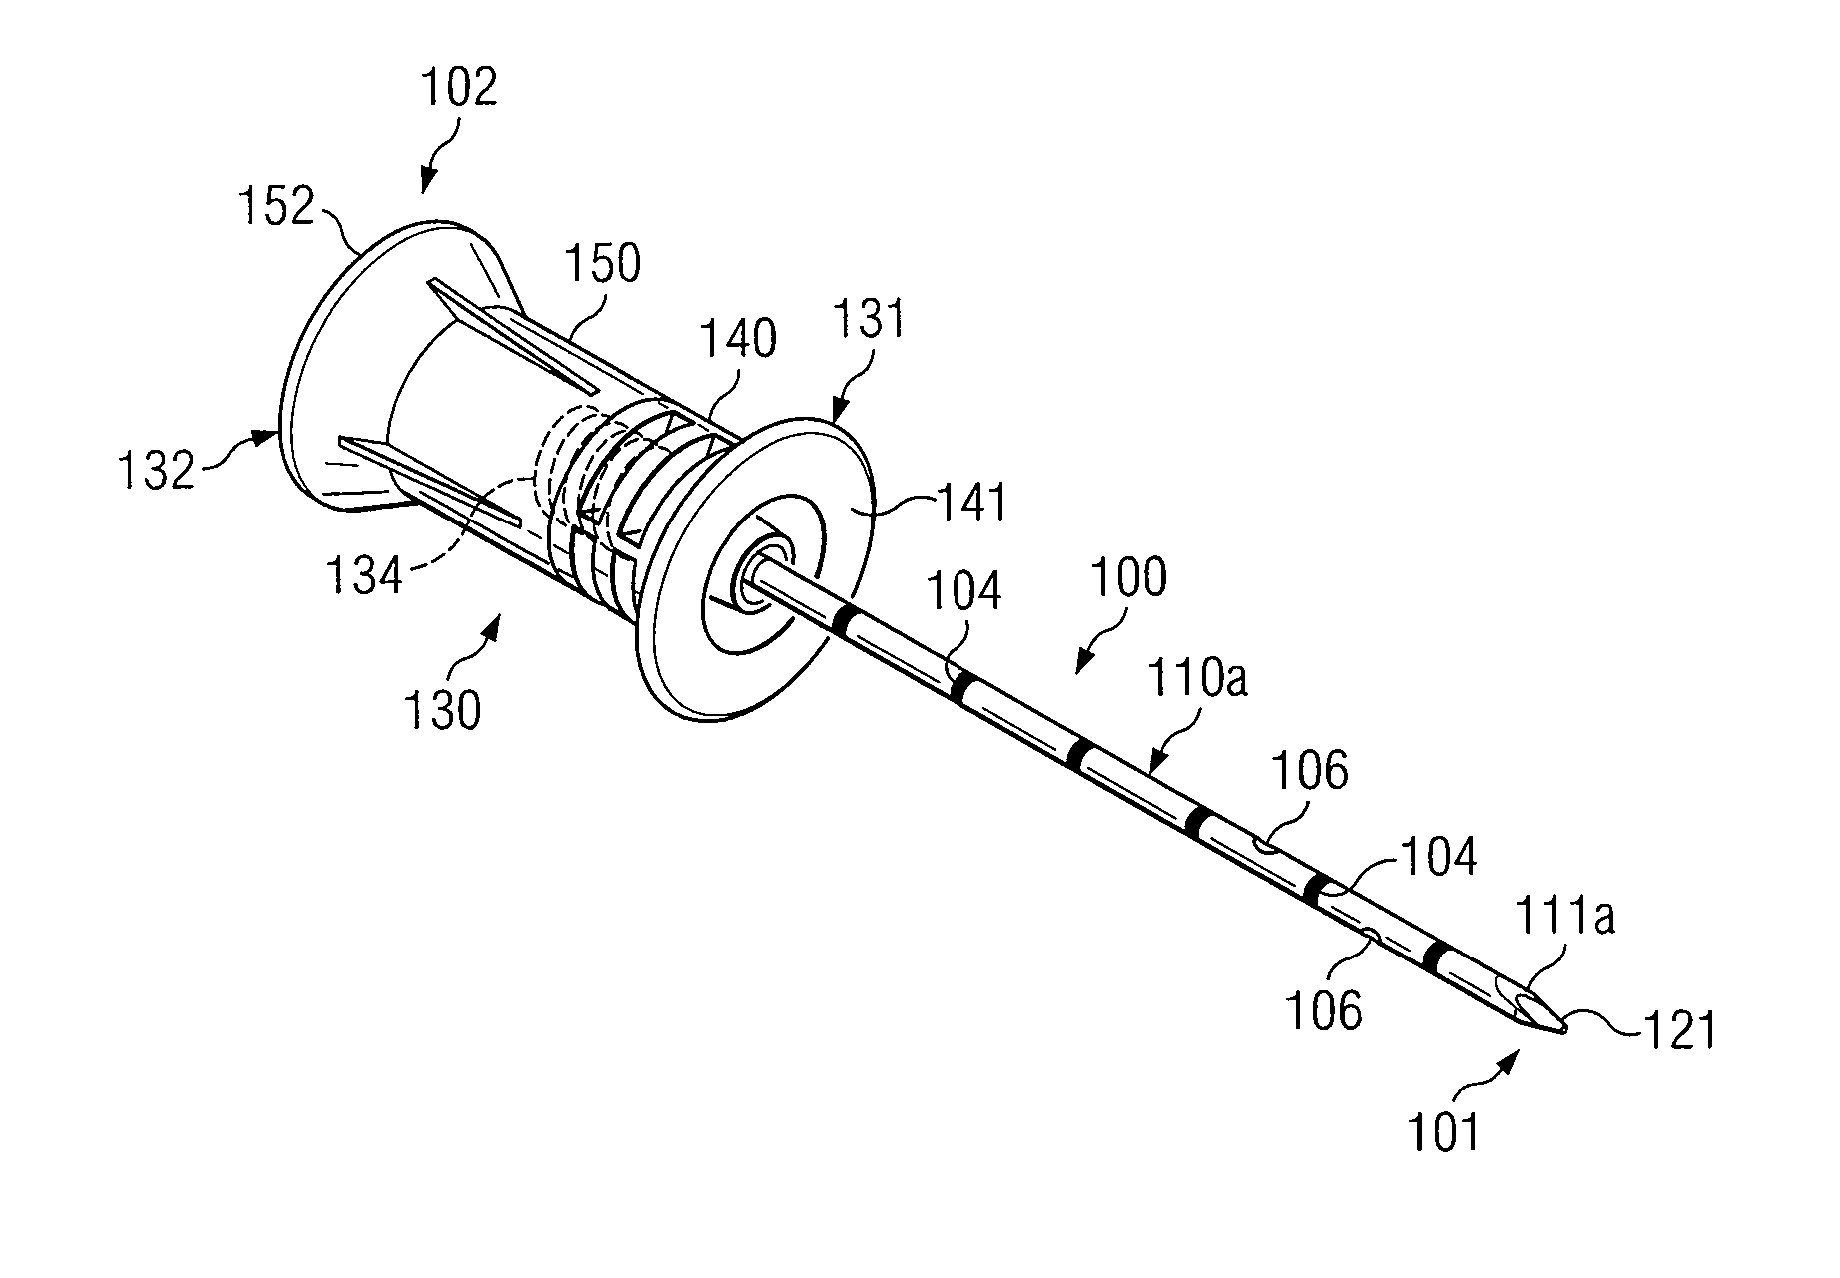 Apparatus and Methods for Biopsy and Aspiration of Bone Marrow